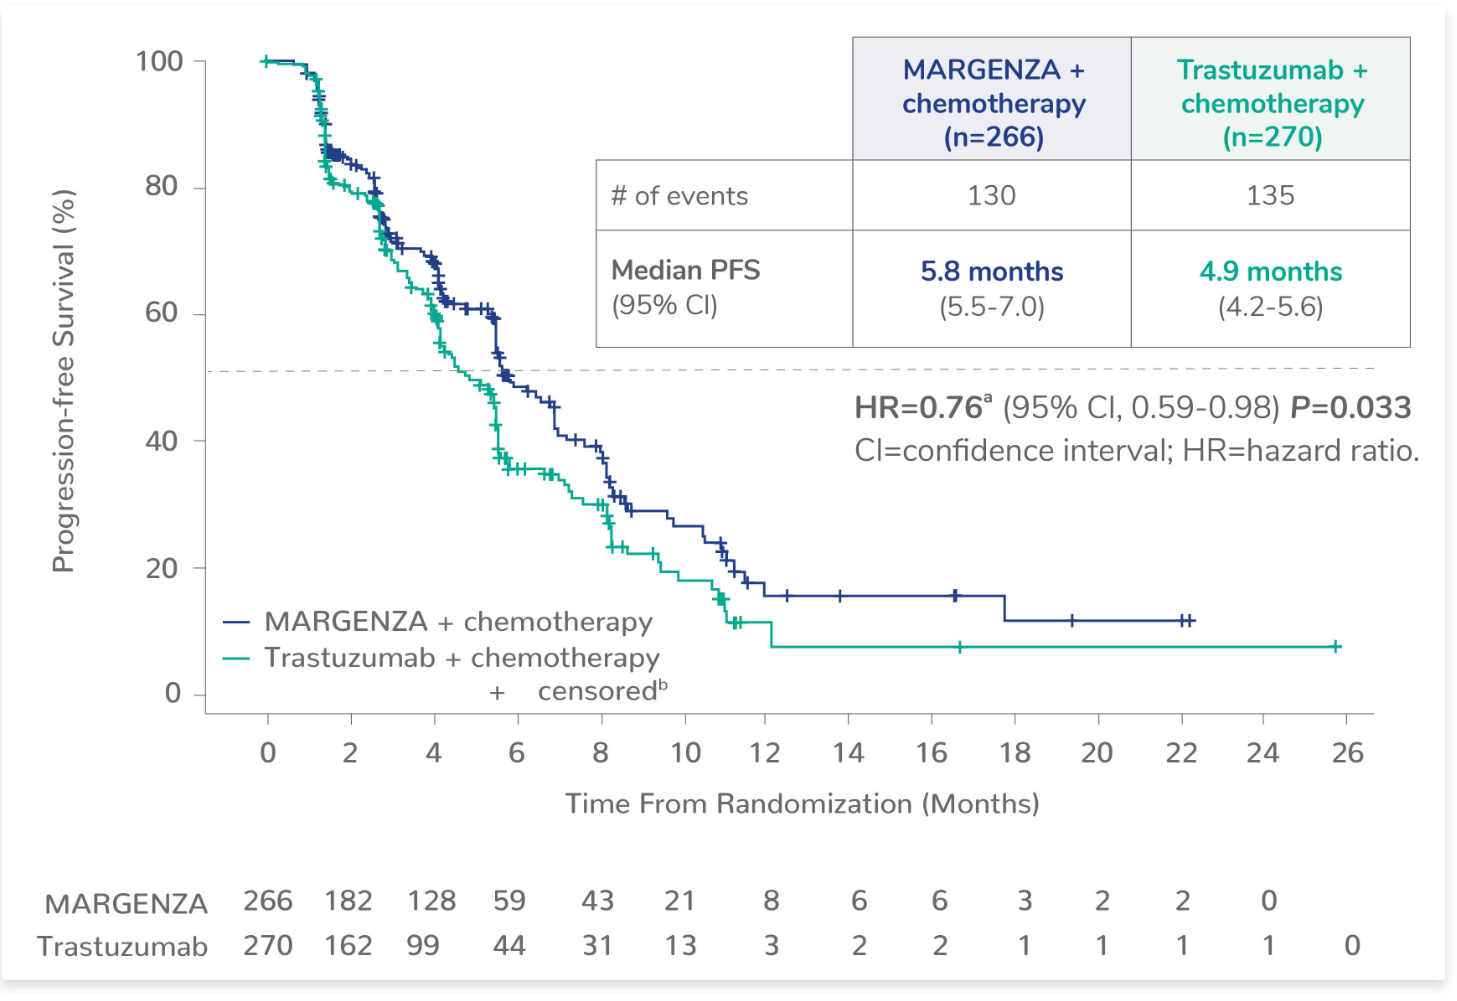 Kaplan Meyer curve showing median progression free survival of 5.8 months for MARGENZA plus chemotherapy in 266 patients compared to 4.9 months for trastuzumab plus chemotherapy in 270 patients. The hazard ratio was 0.76. P value was 0.033.